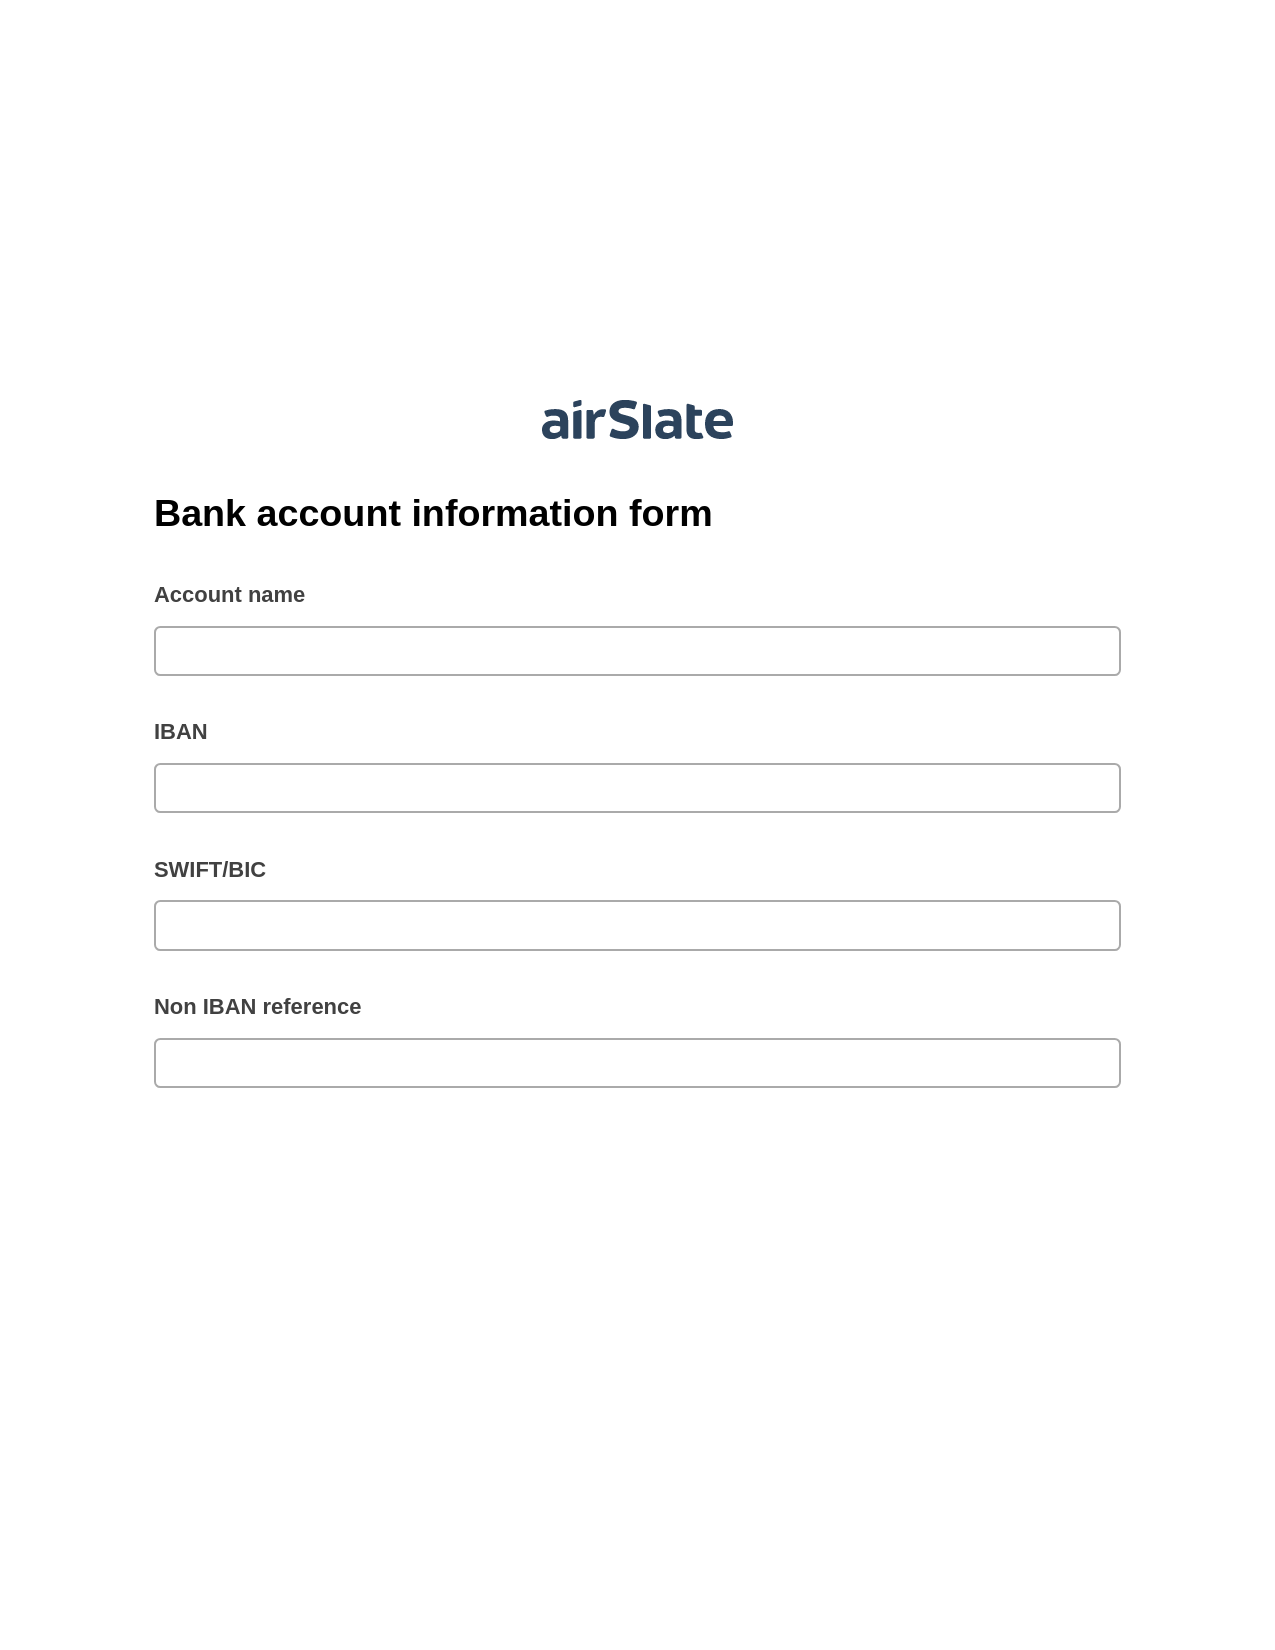 Multirole Bank account information form Pre-fill from MySQL Dropdown Options Bot, Pre-fill with Custom Data Bot, Export to Excel 365 Bot